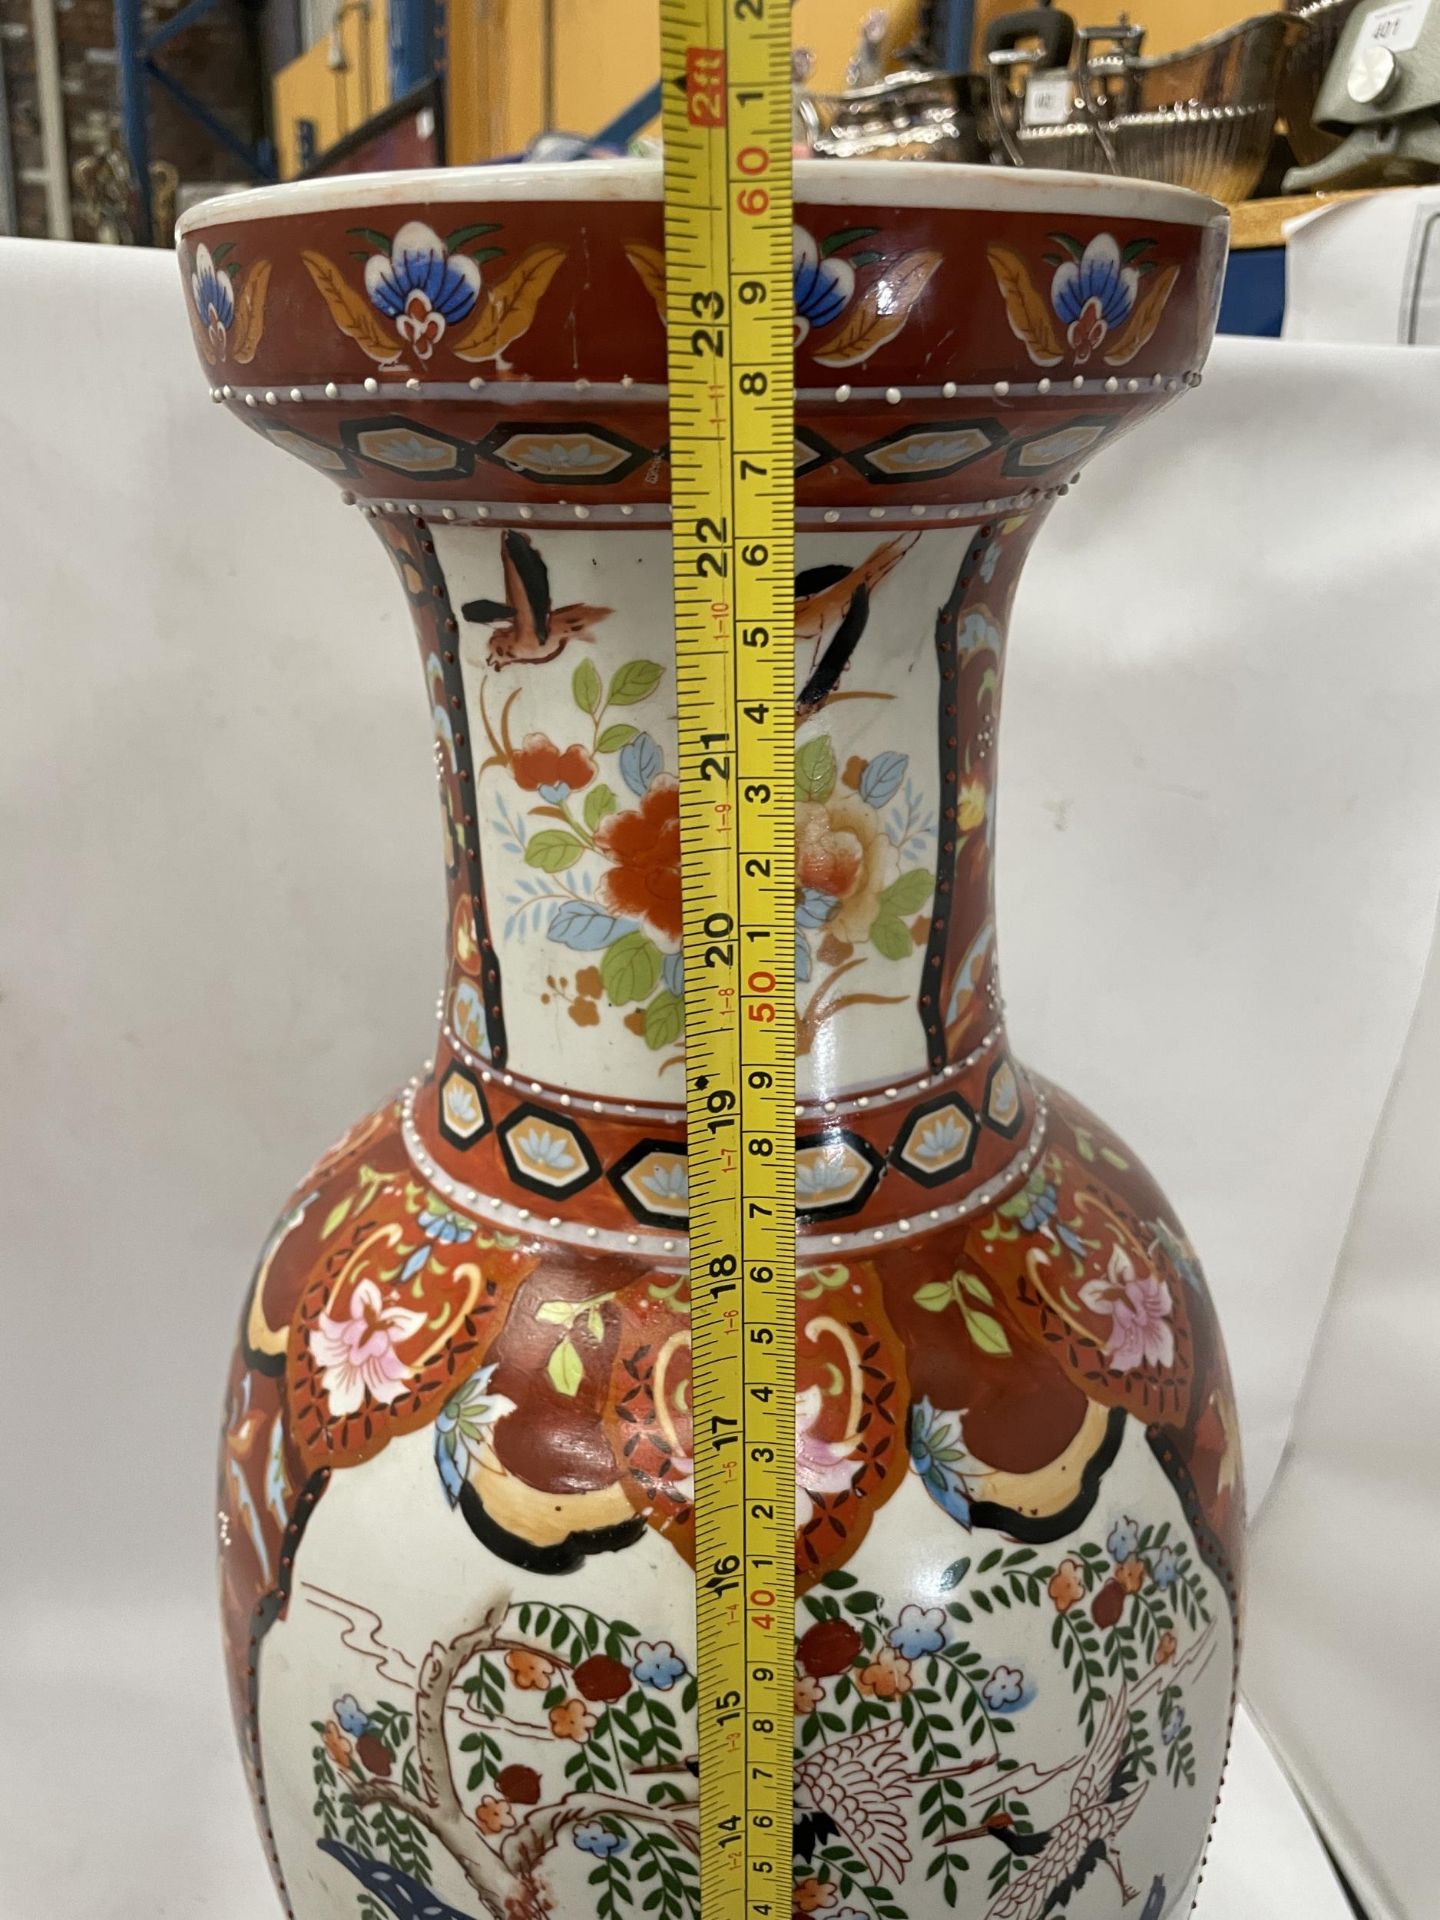 A LARGE ORIENTAL FLOOR VASE WITH HERON DESIGN, HEIGHT 60CM - Image 4 of 4